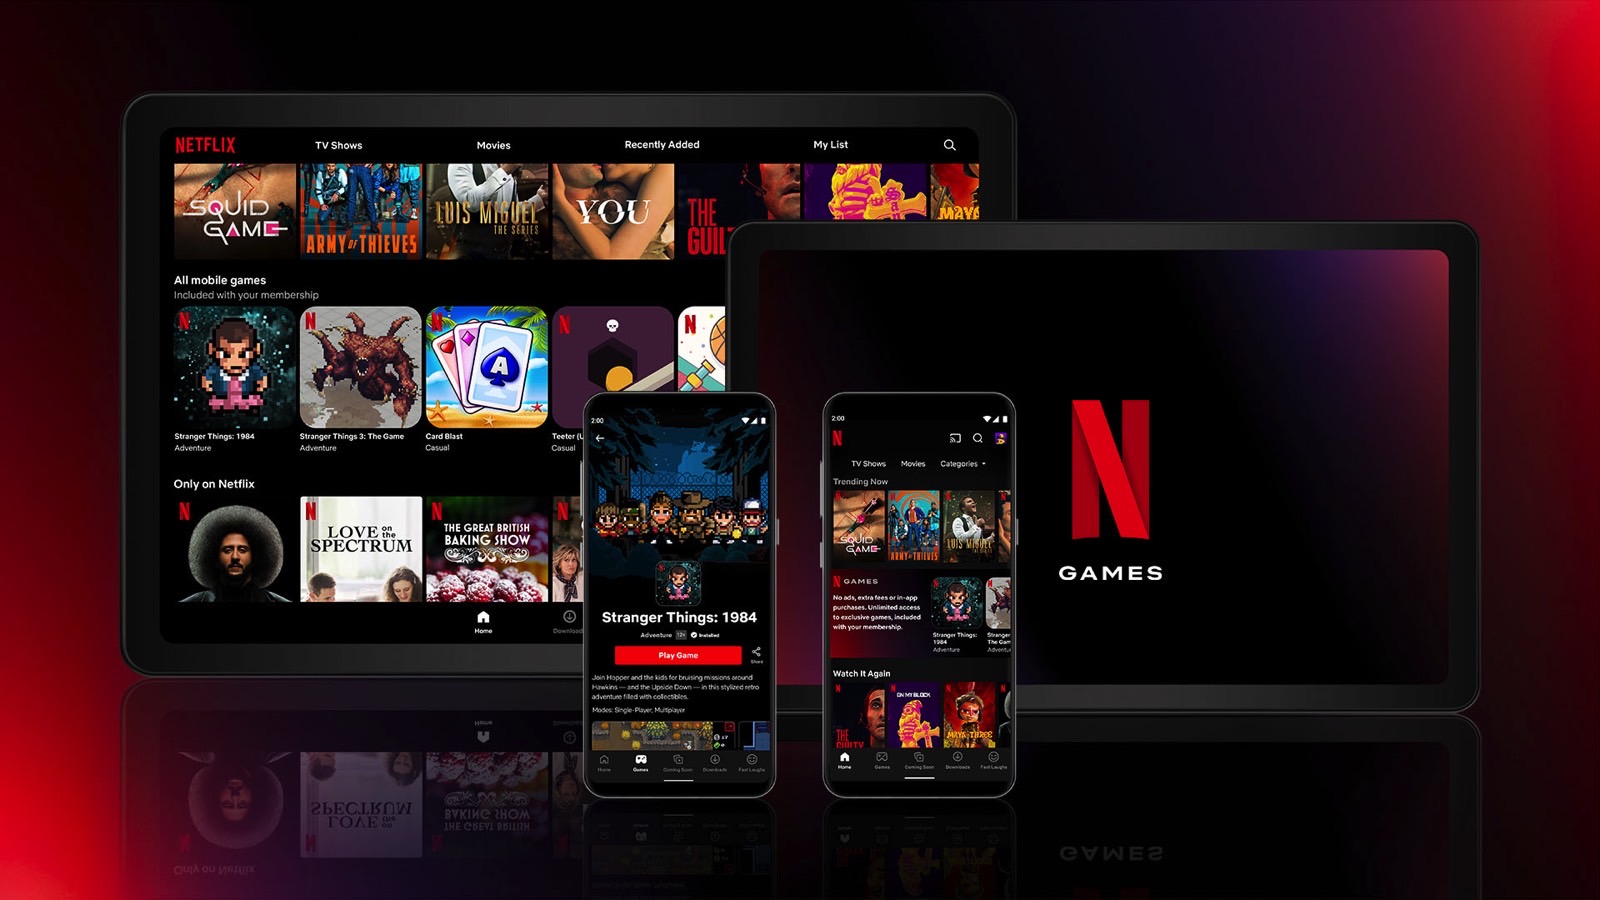 Netflix is testing an awesome new redesign